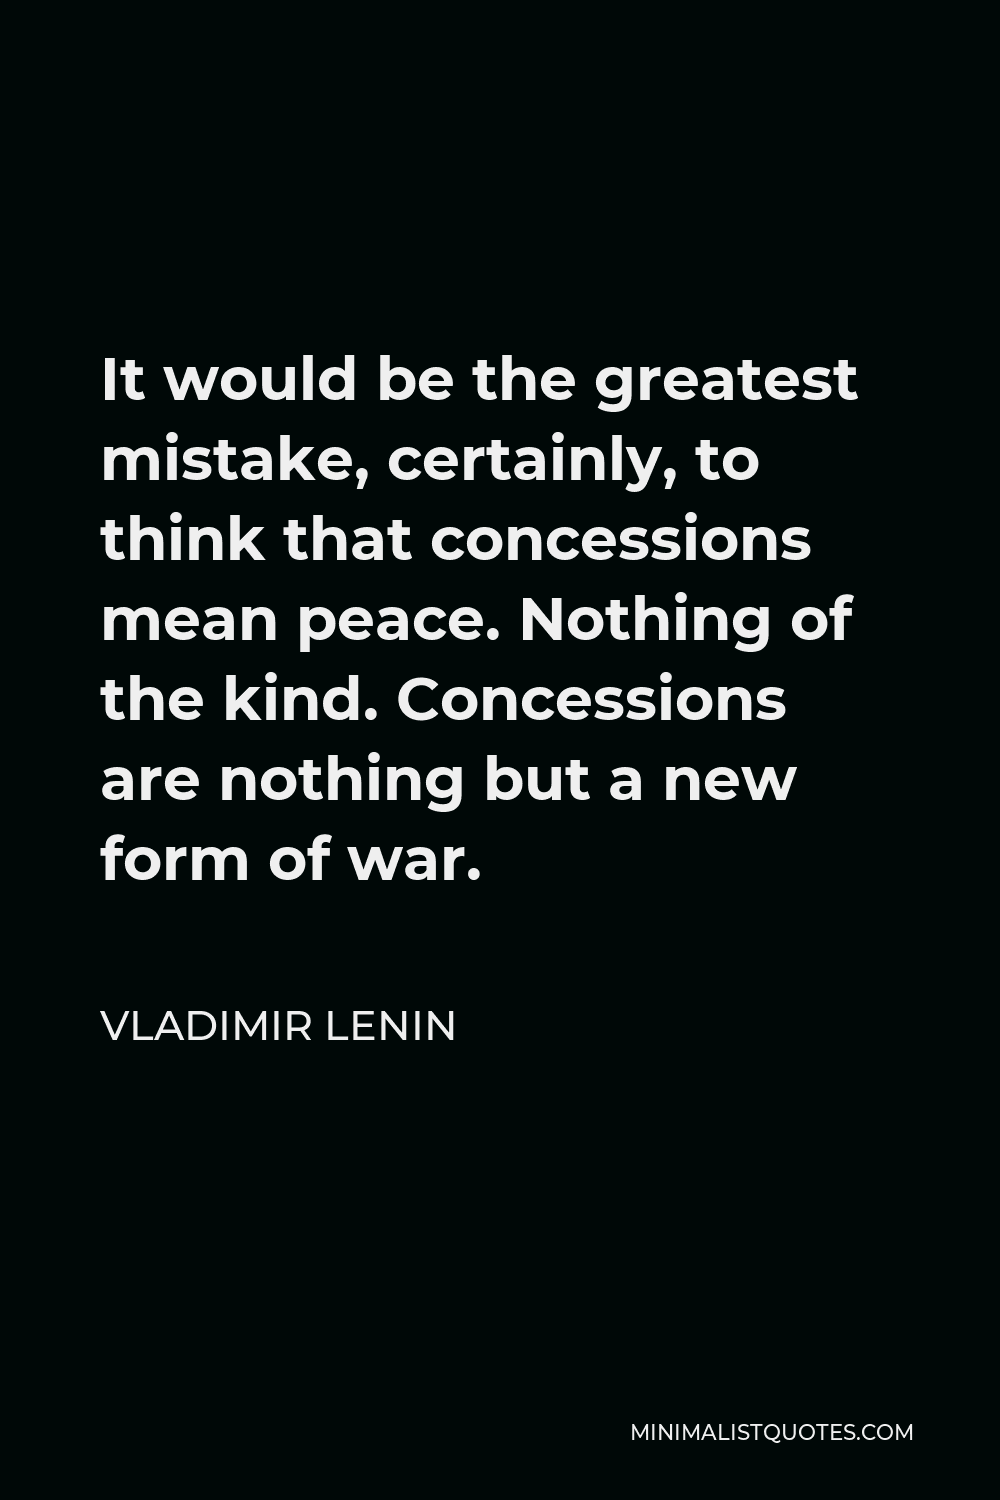 Vladimir Lenin Quote - It would be the greatest mistake, certainly, to think that concessions mean peace. Nothing of the kind. Concessions are nothing but a new form of war.